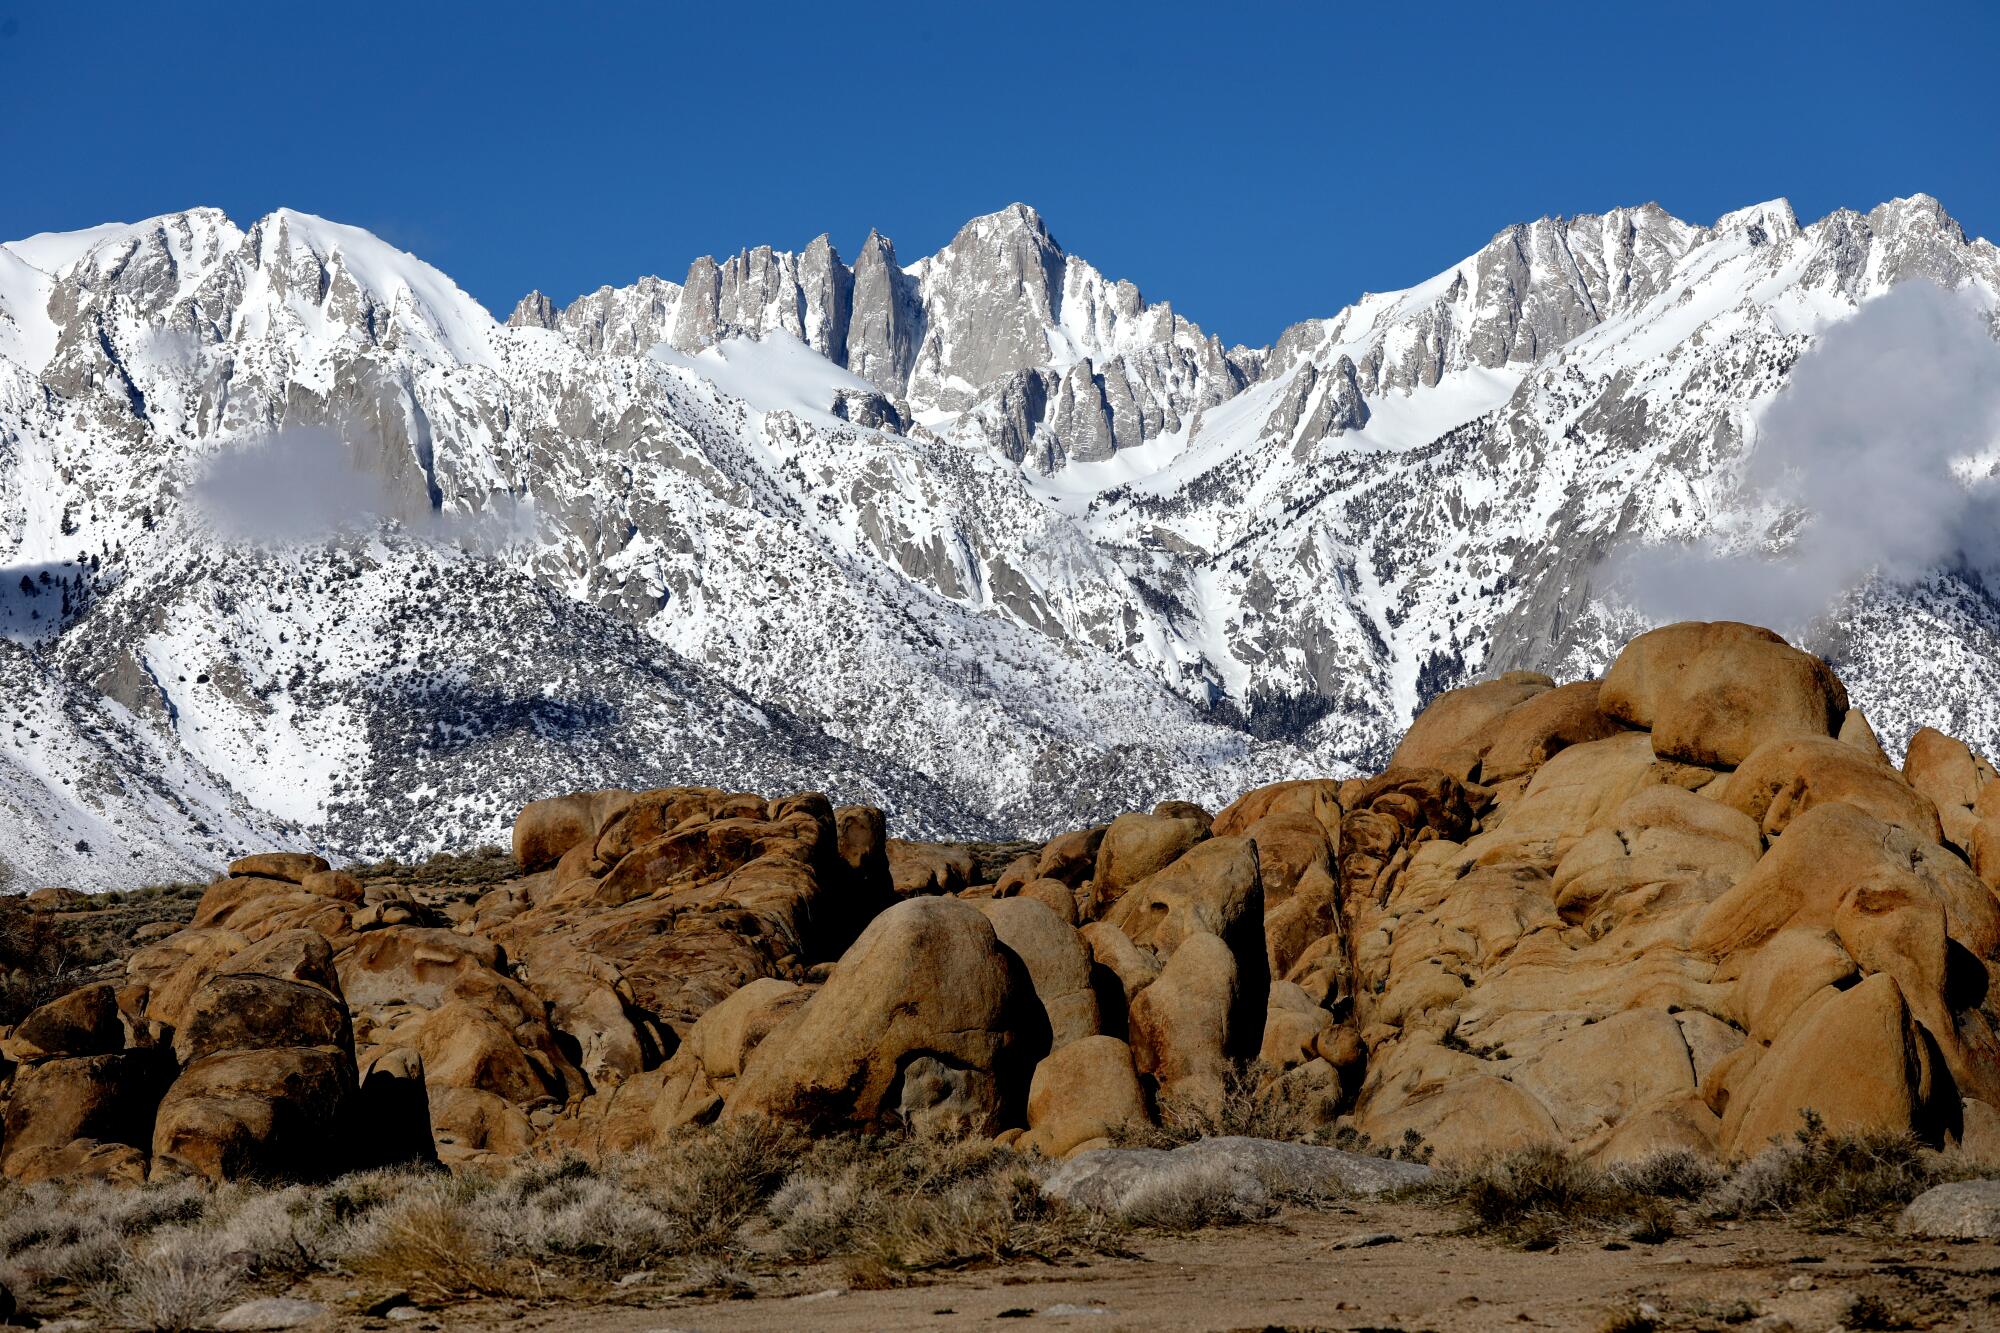 Snowy mountains on the horizon fill most of the frame. Dry, sand-stone rocks and land fills the foreground.